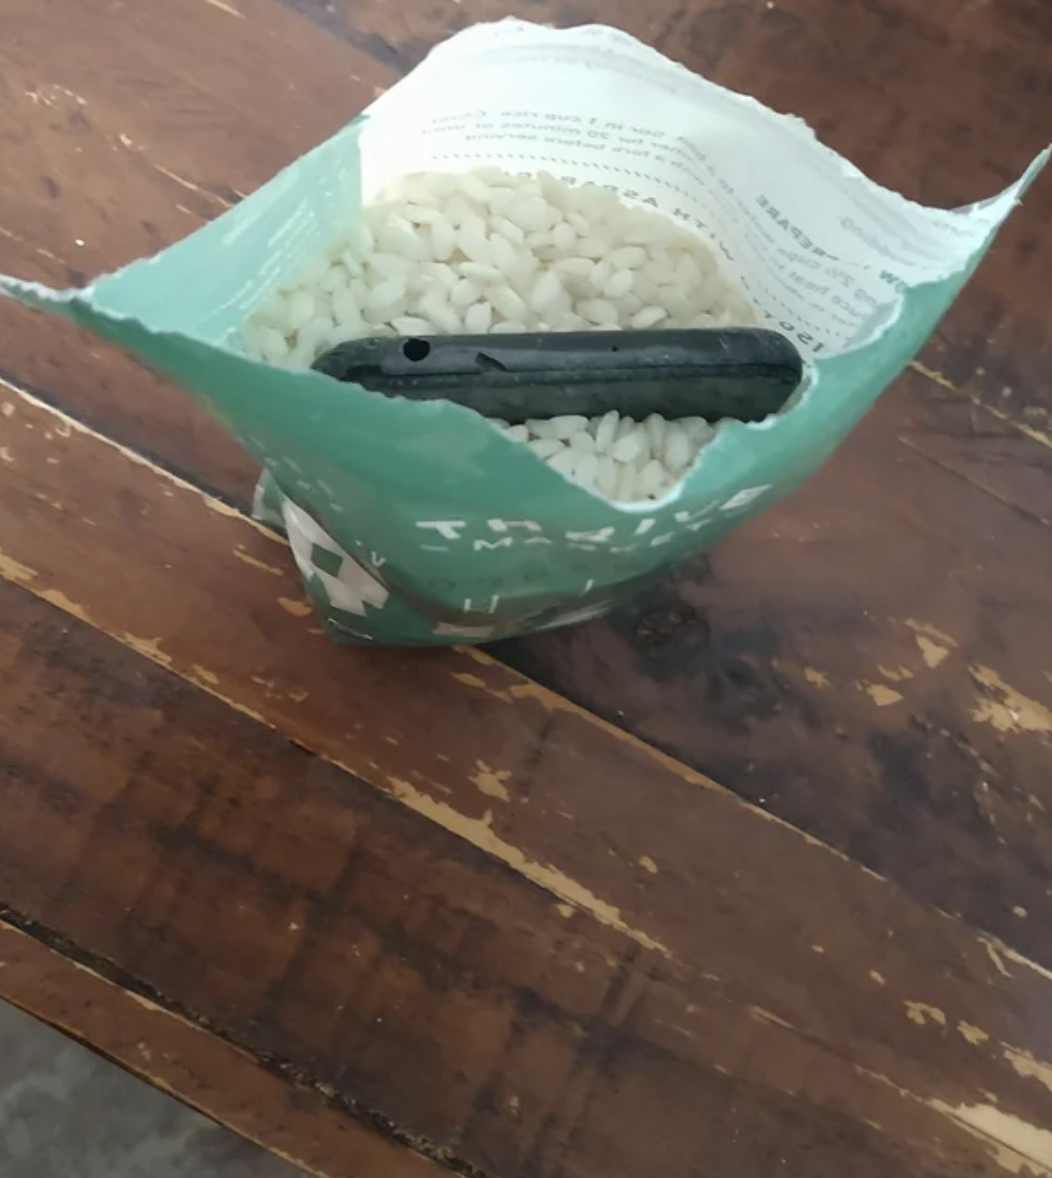 phone in a bag of rice